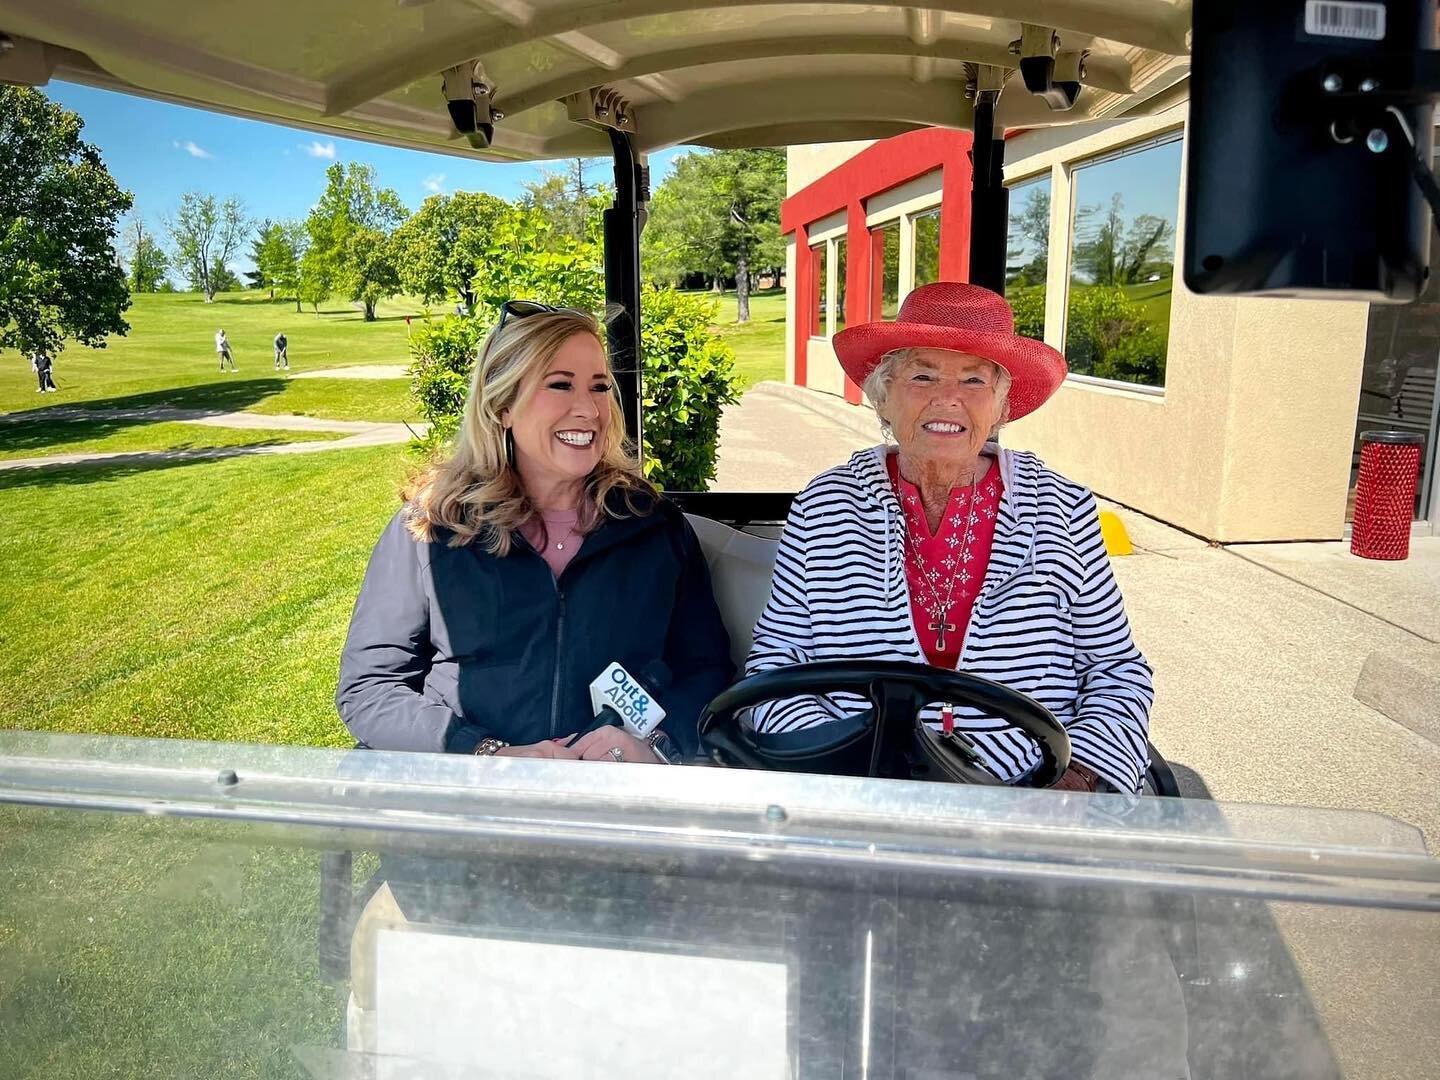 Fore! 🏌️&zwj;♂️🏌️&zwj;♀️ A huge thank you to @deann_stephens and @fox56news for featuring our golf course's 60th year in business. We will be celebrating all year long so come see us! Here's to many more years of birdies, eagles, and great memories